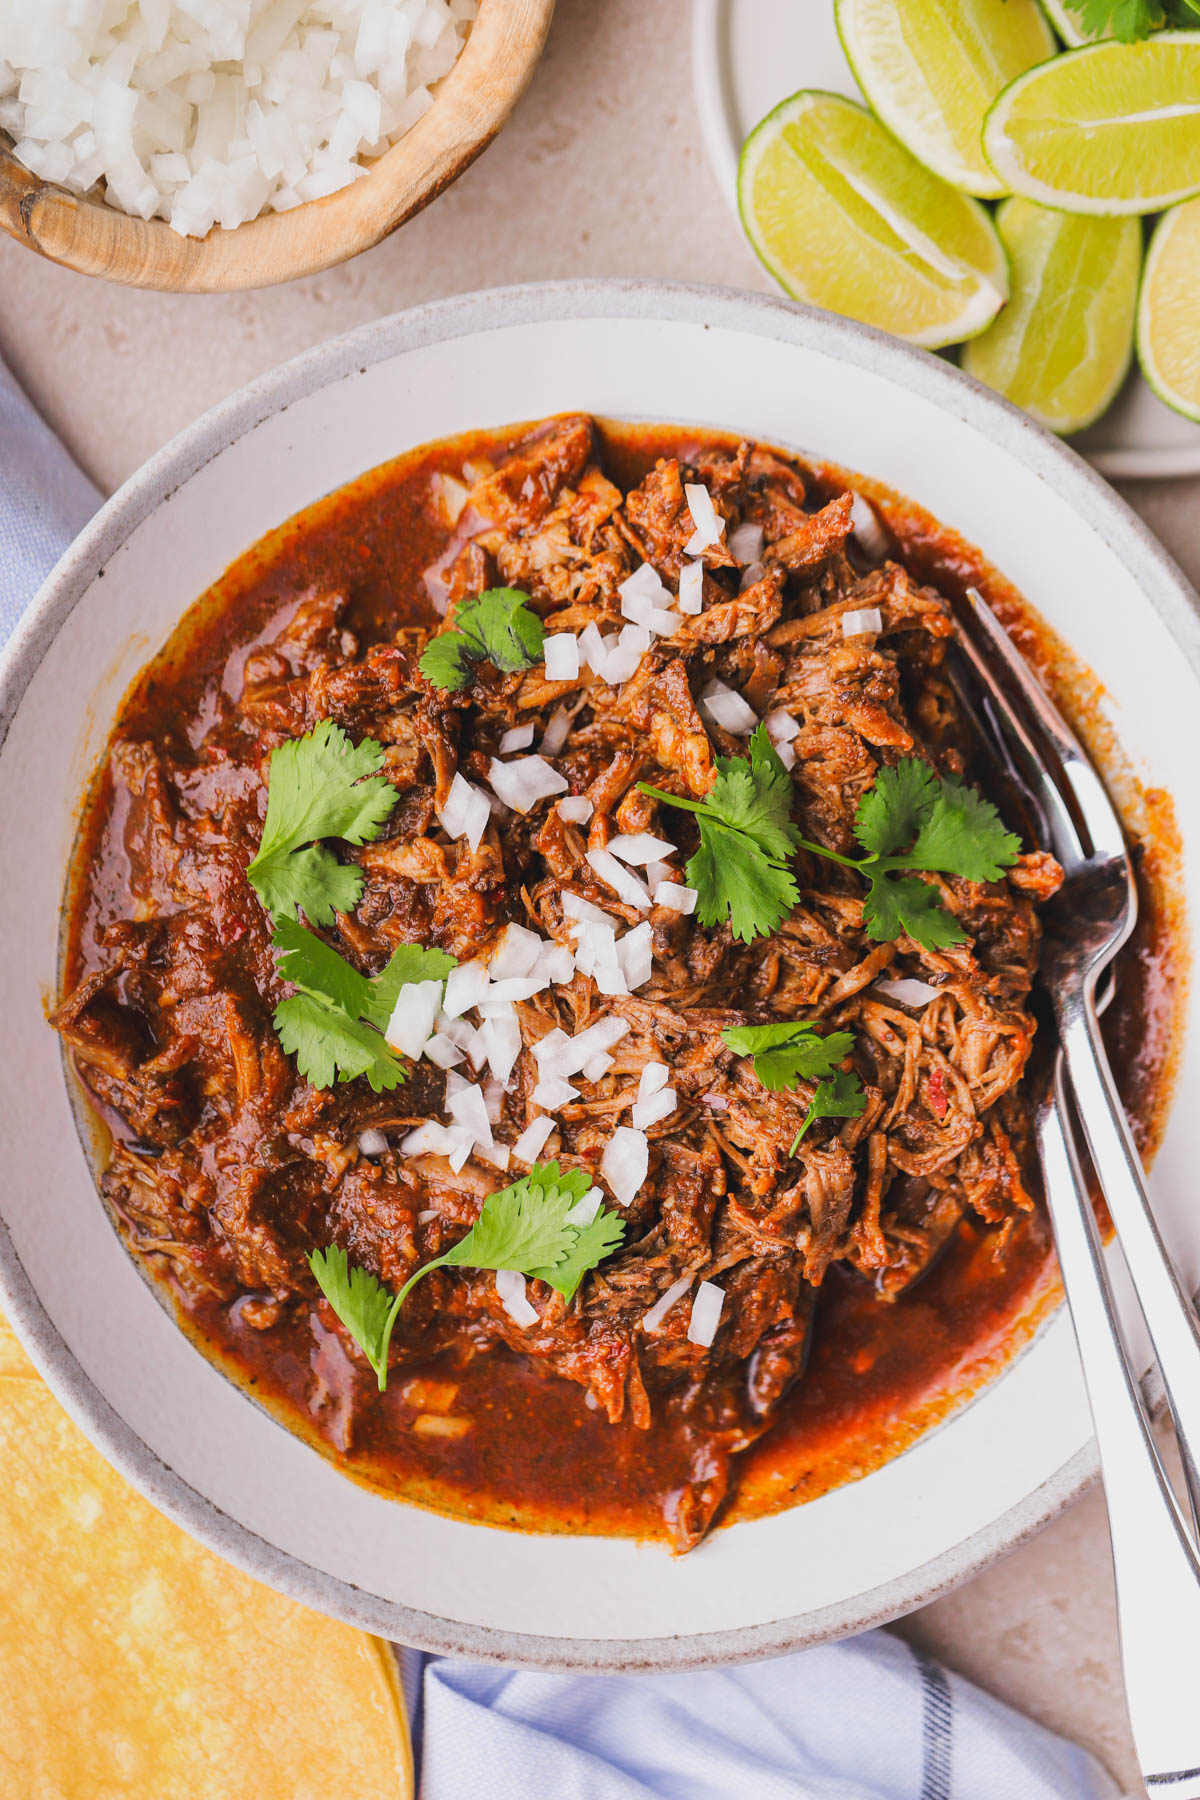 Slow cooked beef inside a tomato-chili broth.  